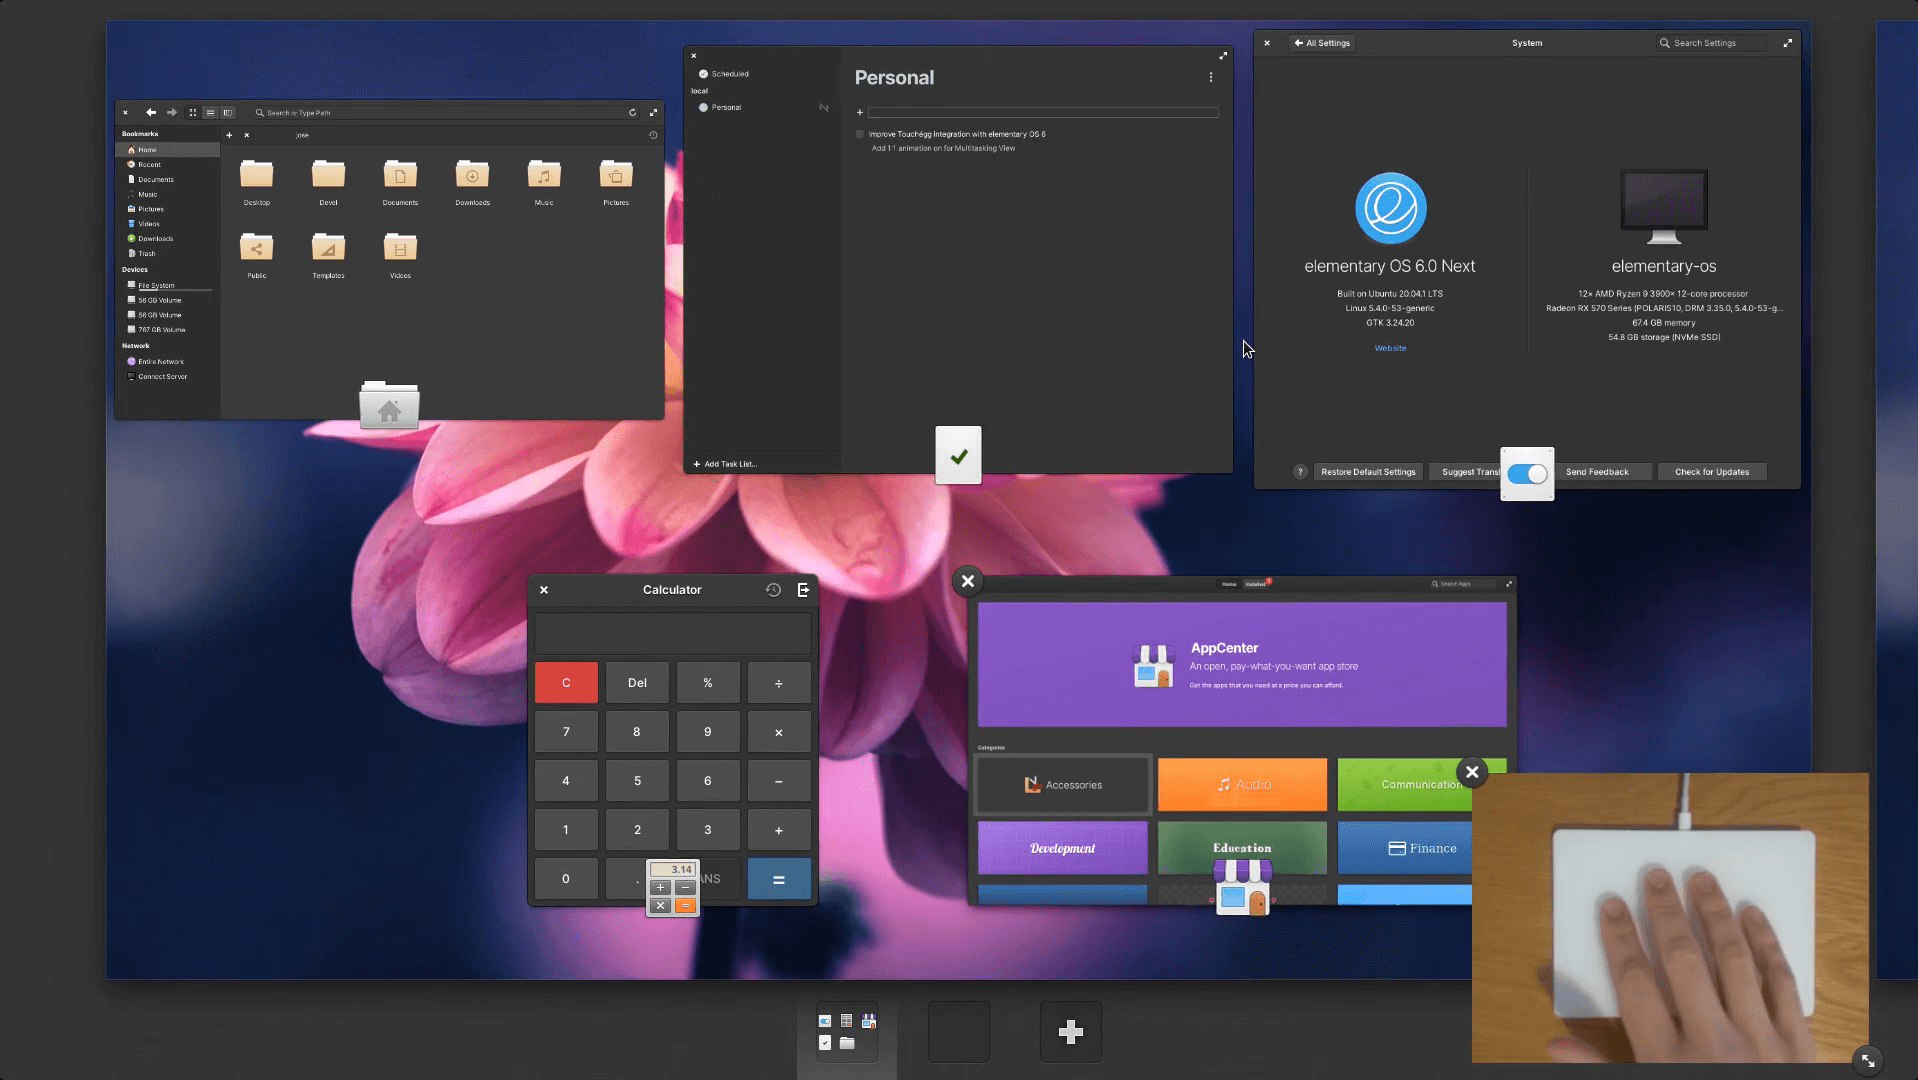 Multi-touch gesture in elementary OS 6